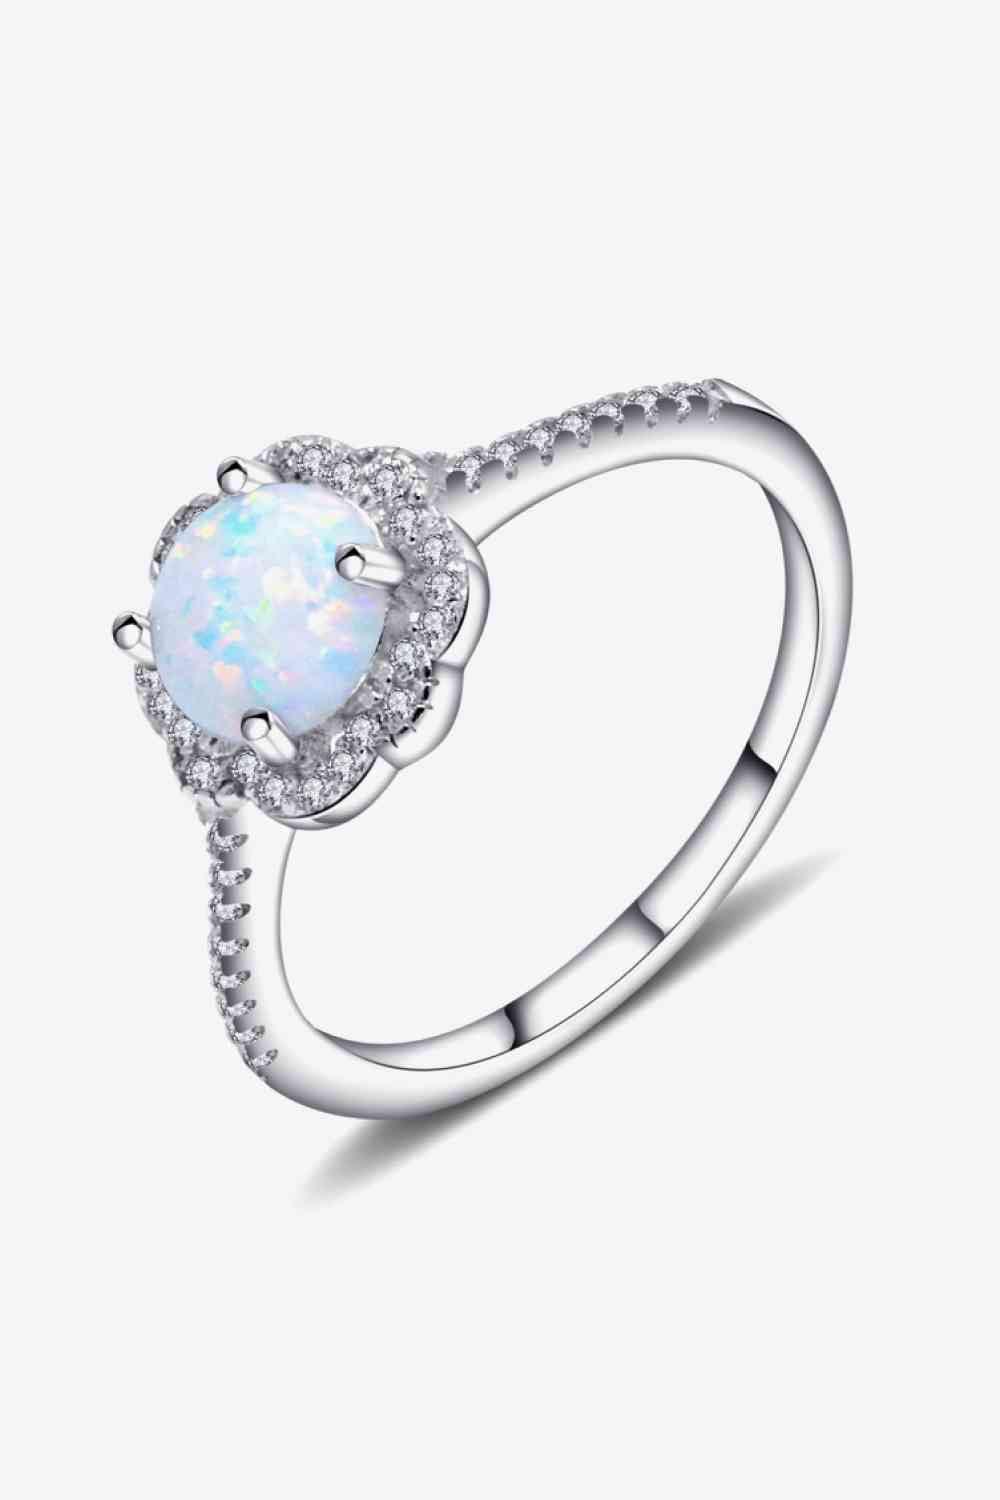 Opal 4-Prong, 925 Sterling Silver, Platinum-Plated Ring - God's Girl Gifts And Apparel